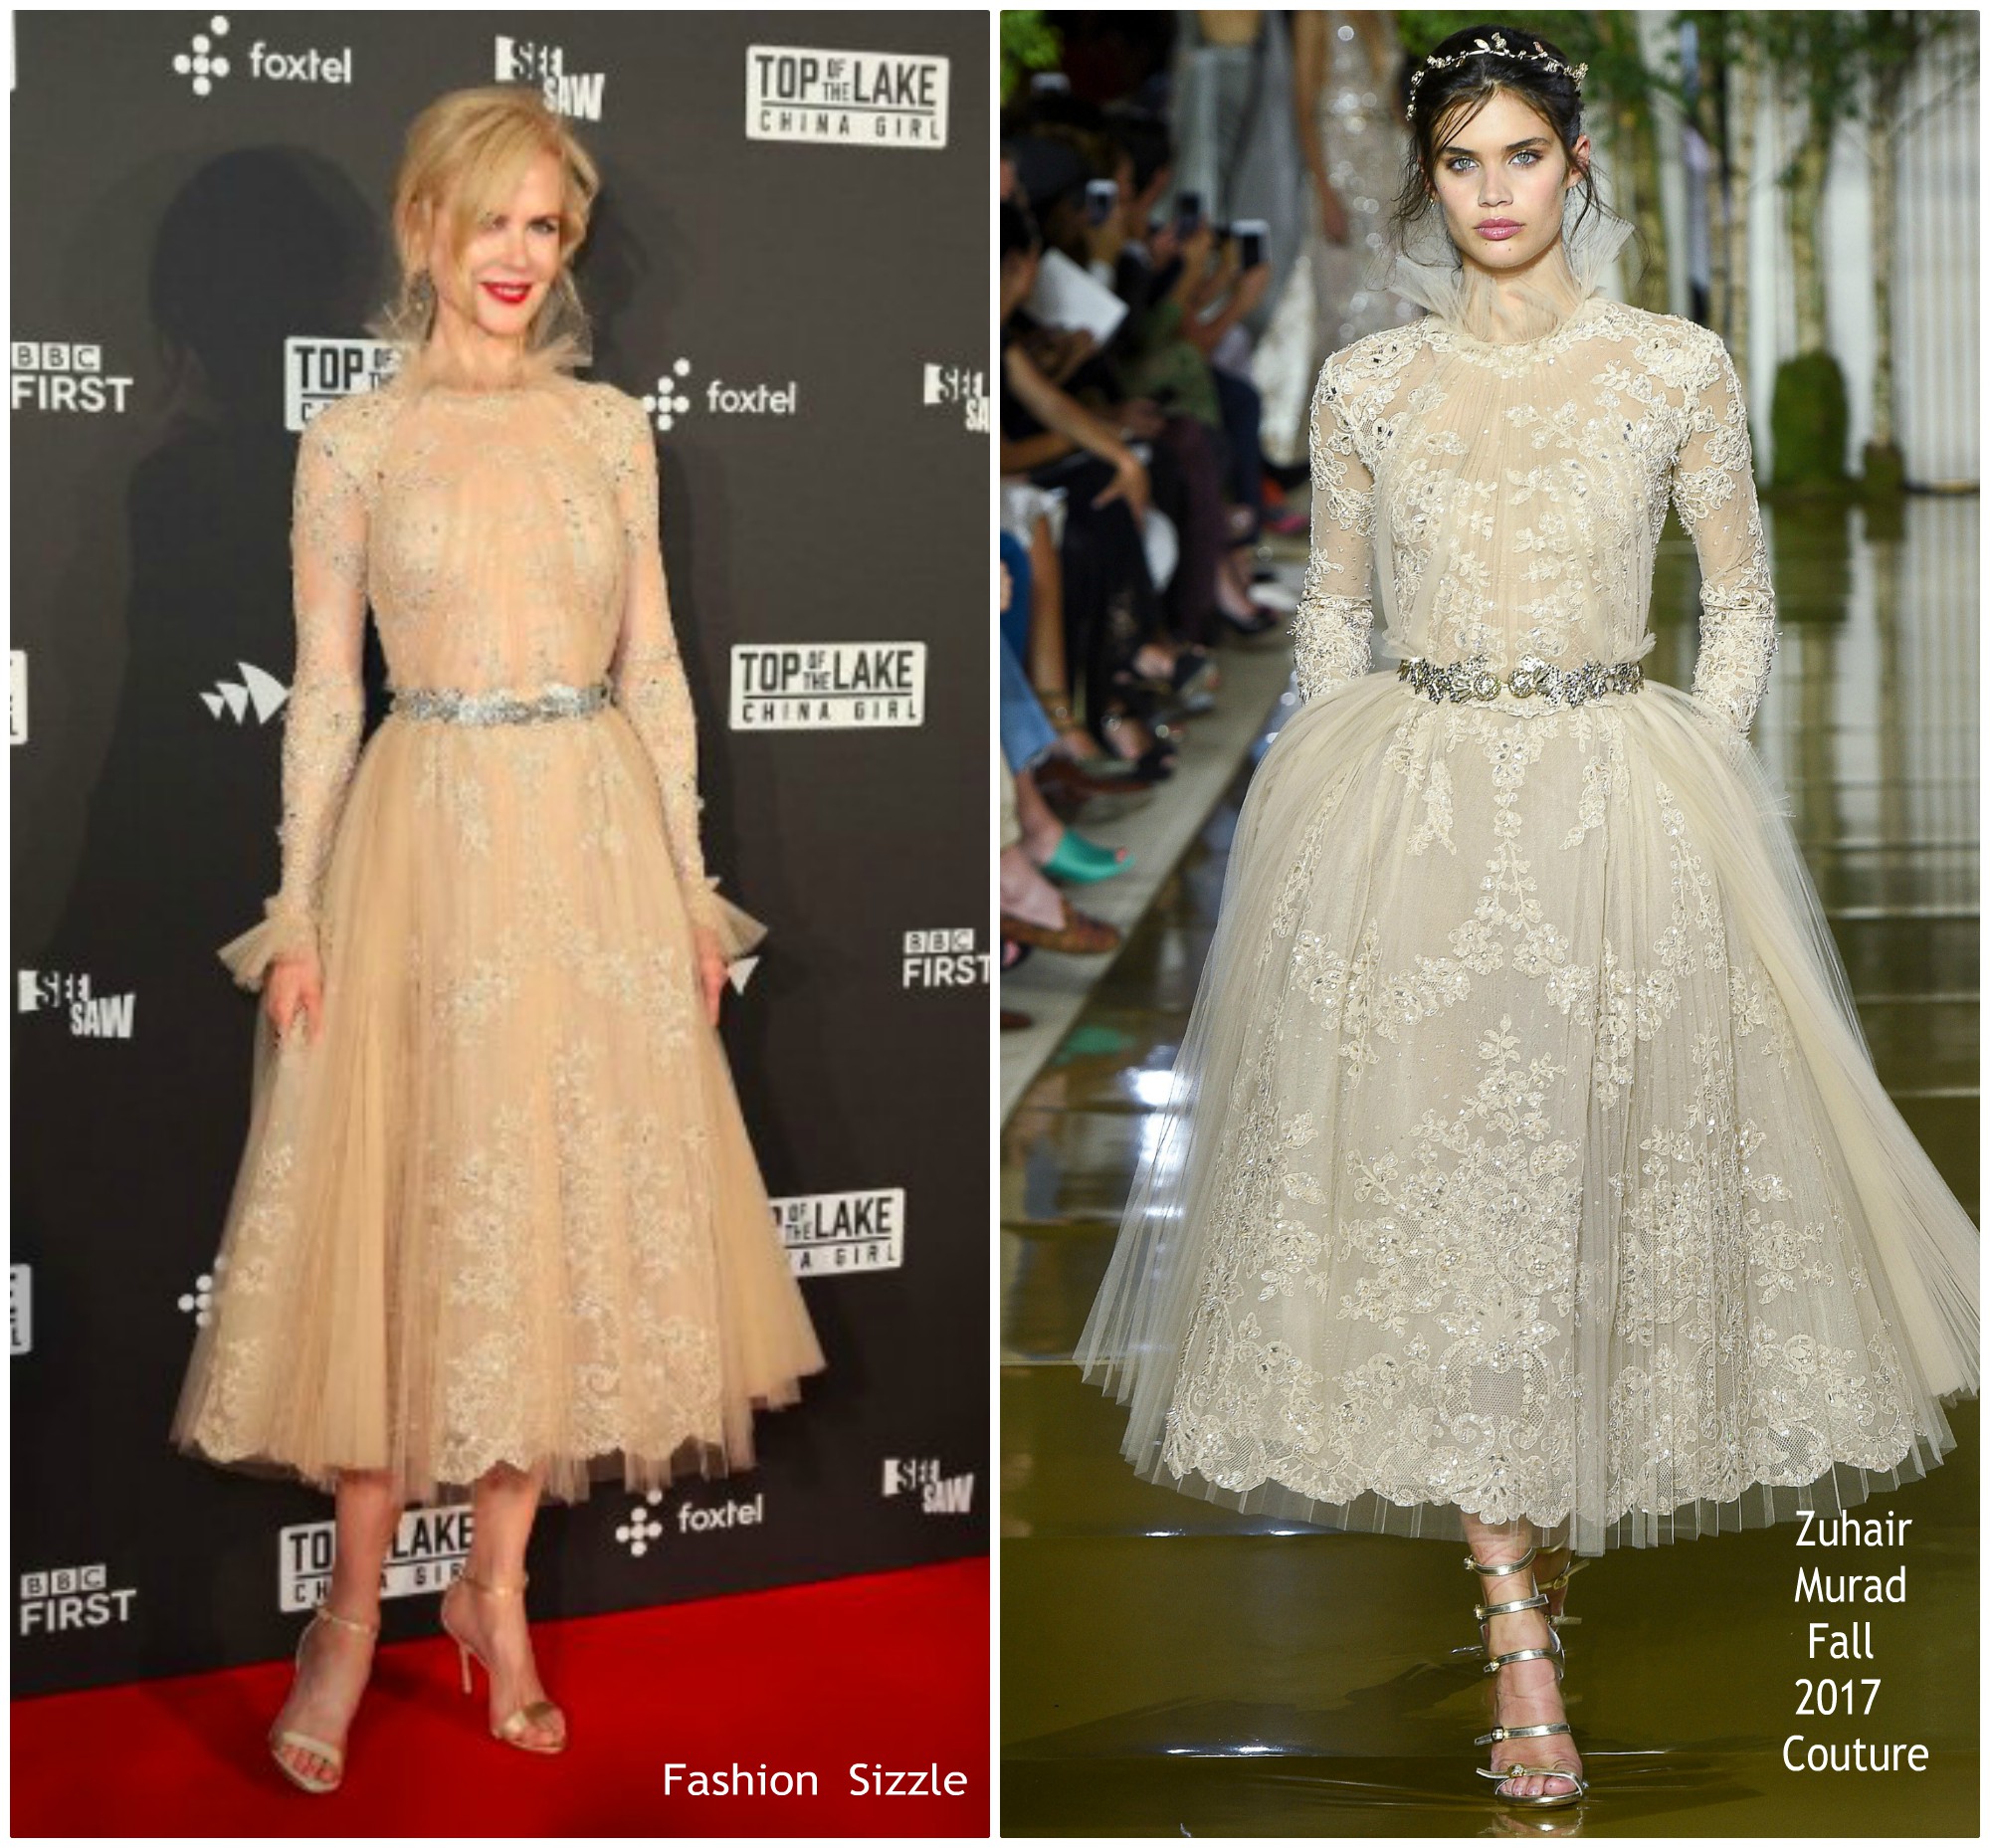 nicole-kidman-in-zuhair-murad-couture-top-of-the-lake-china-girl-sydney-premiere